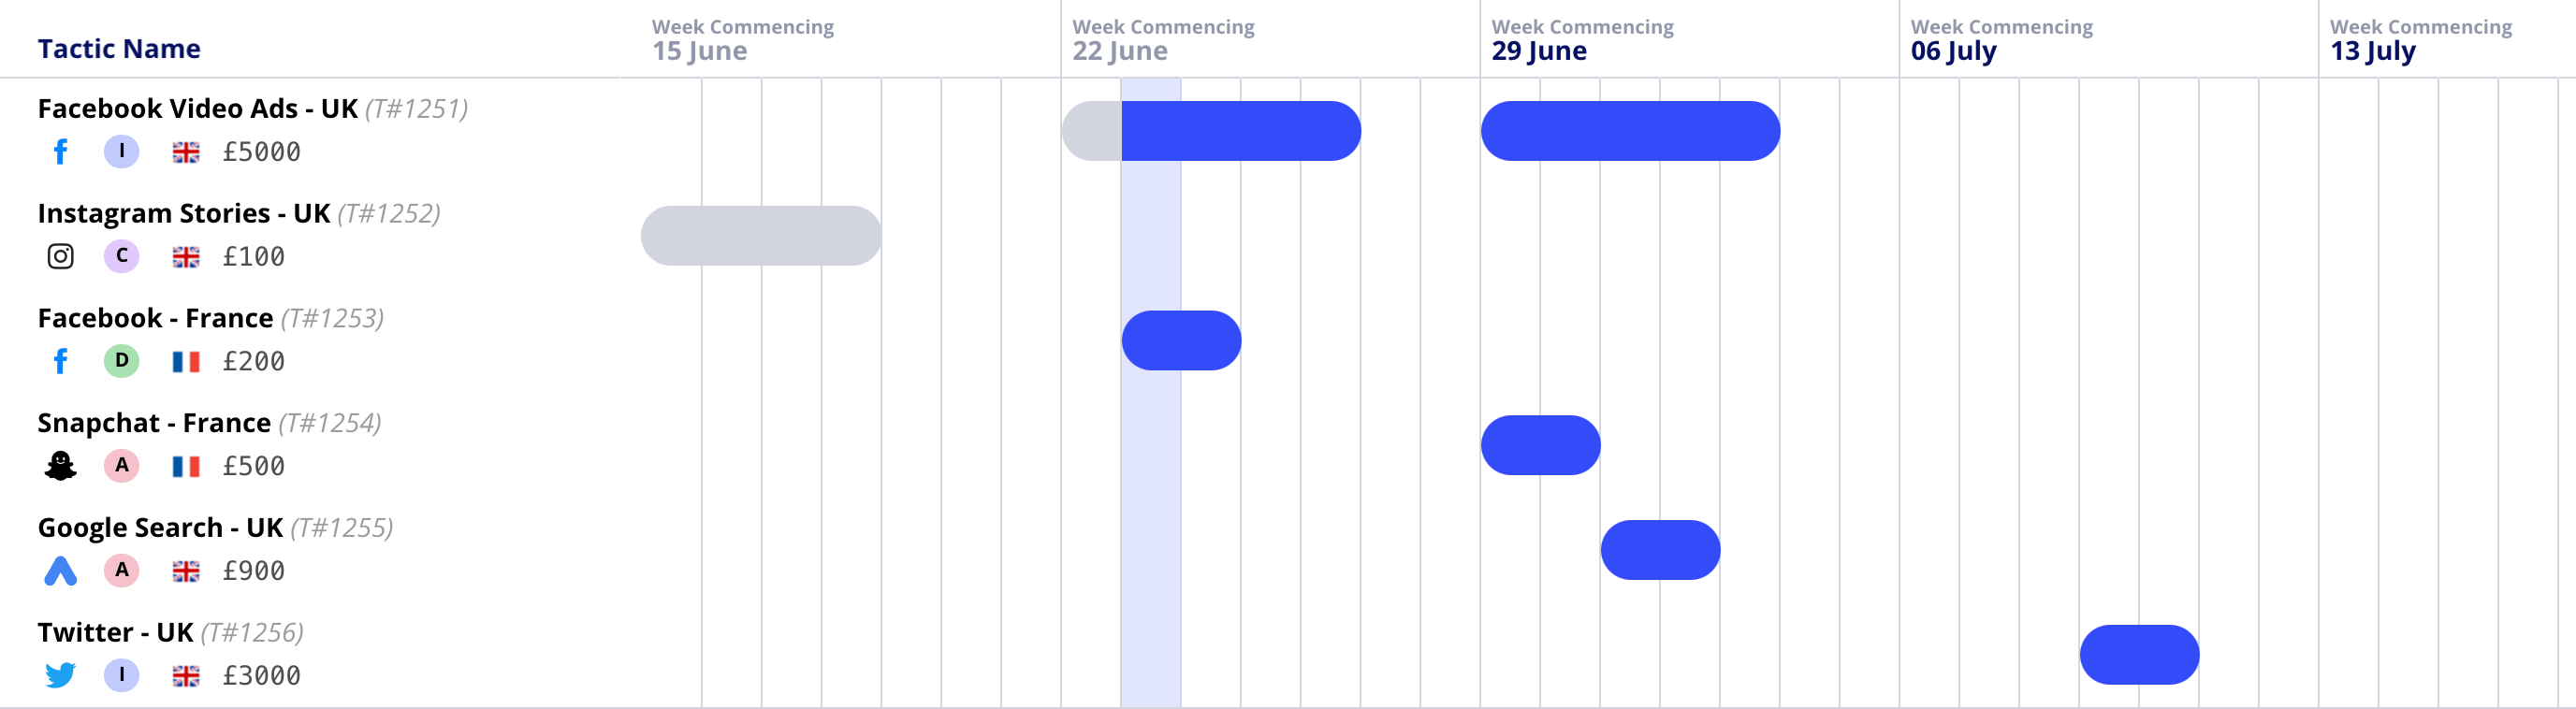 Gantt chart table displaying the schedule